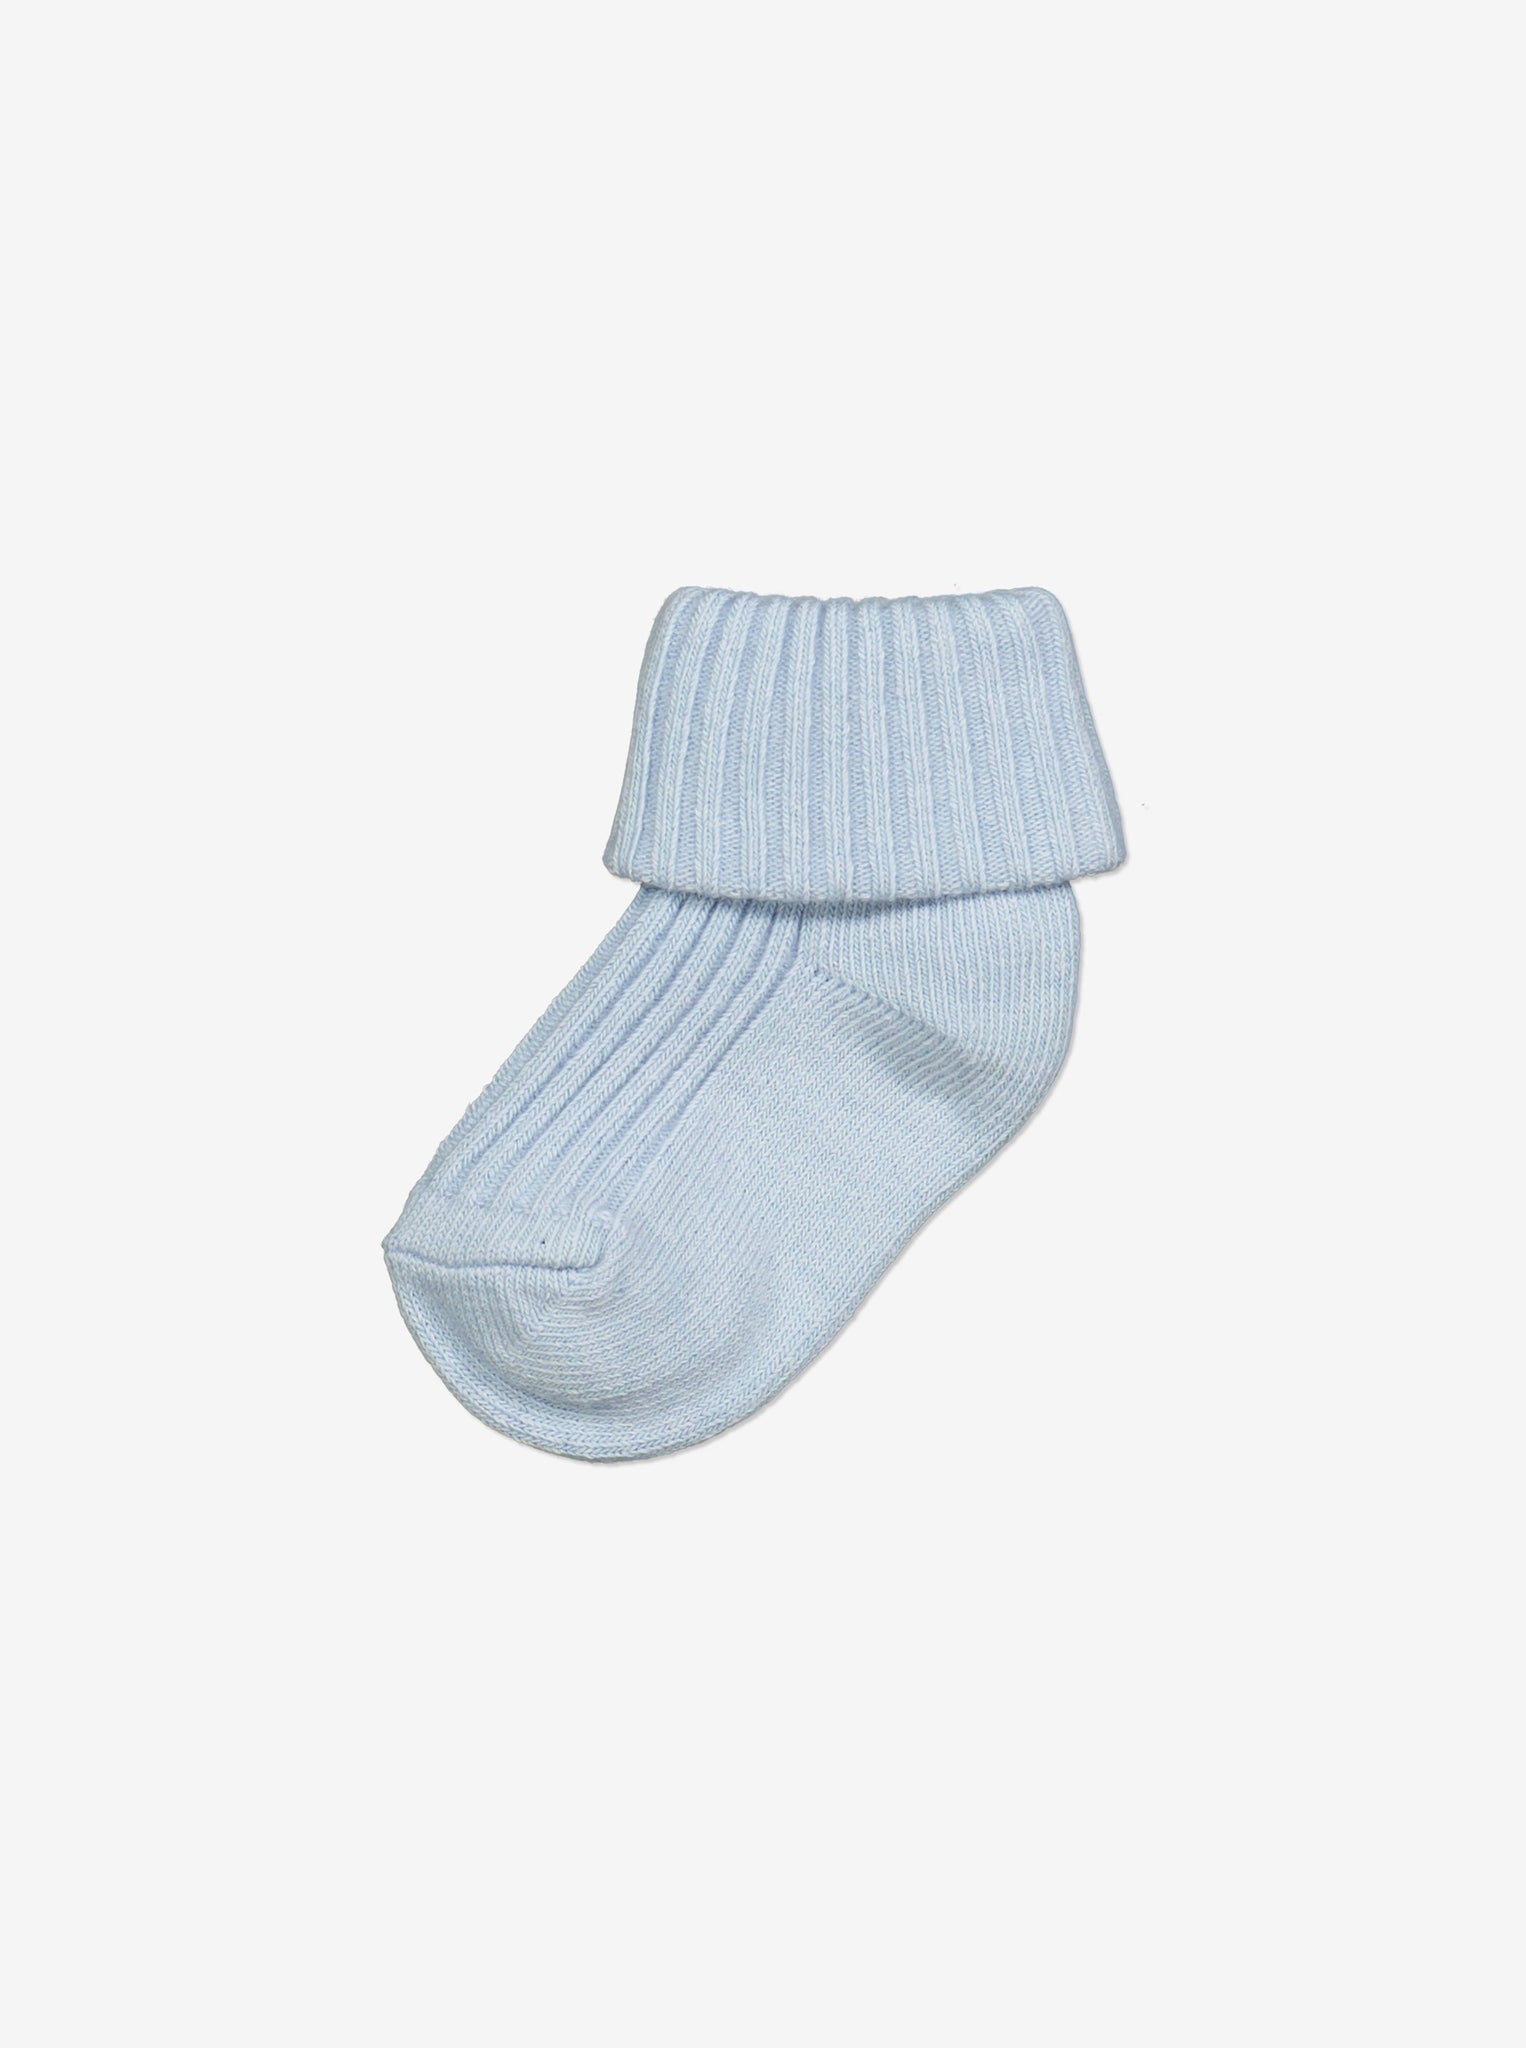  Organic Cotton Blue Baby Socks from Polarn O. Pyret Kidswear. Made from sustainably sourced materials.